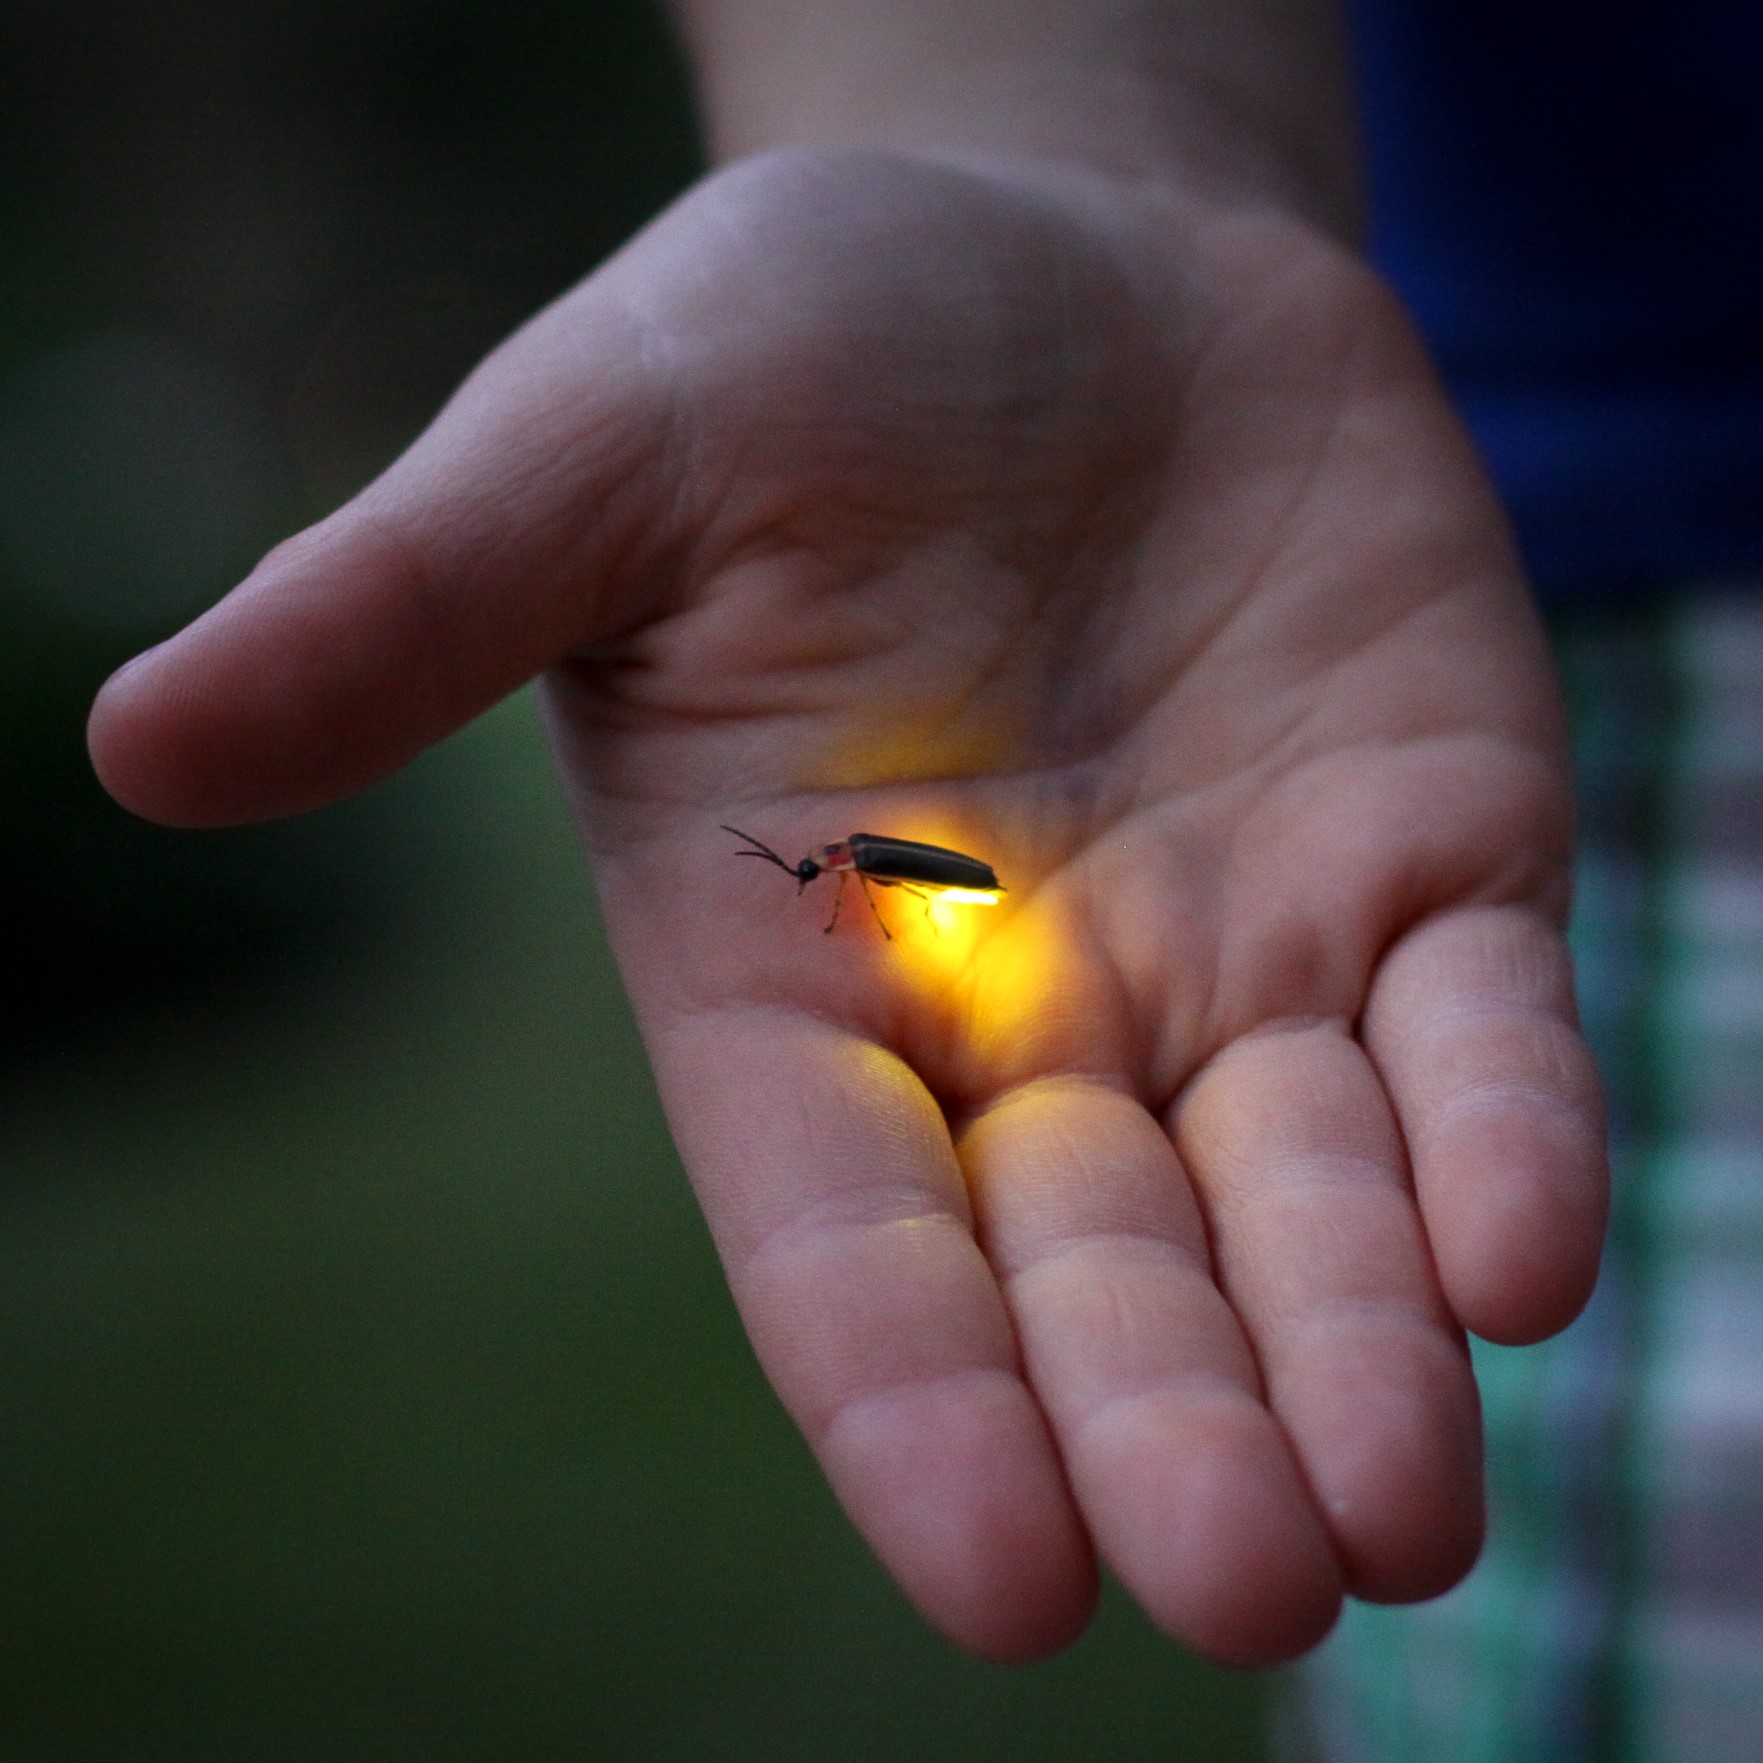 Firefly-in-hand_ Jessica Lucia-flickr-CC-BY-NC.jpg